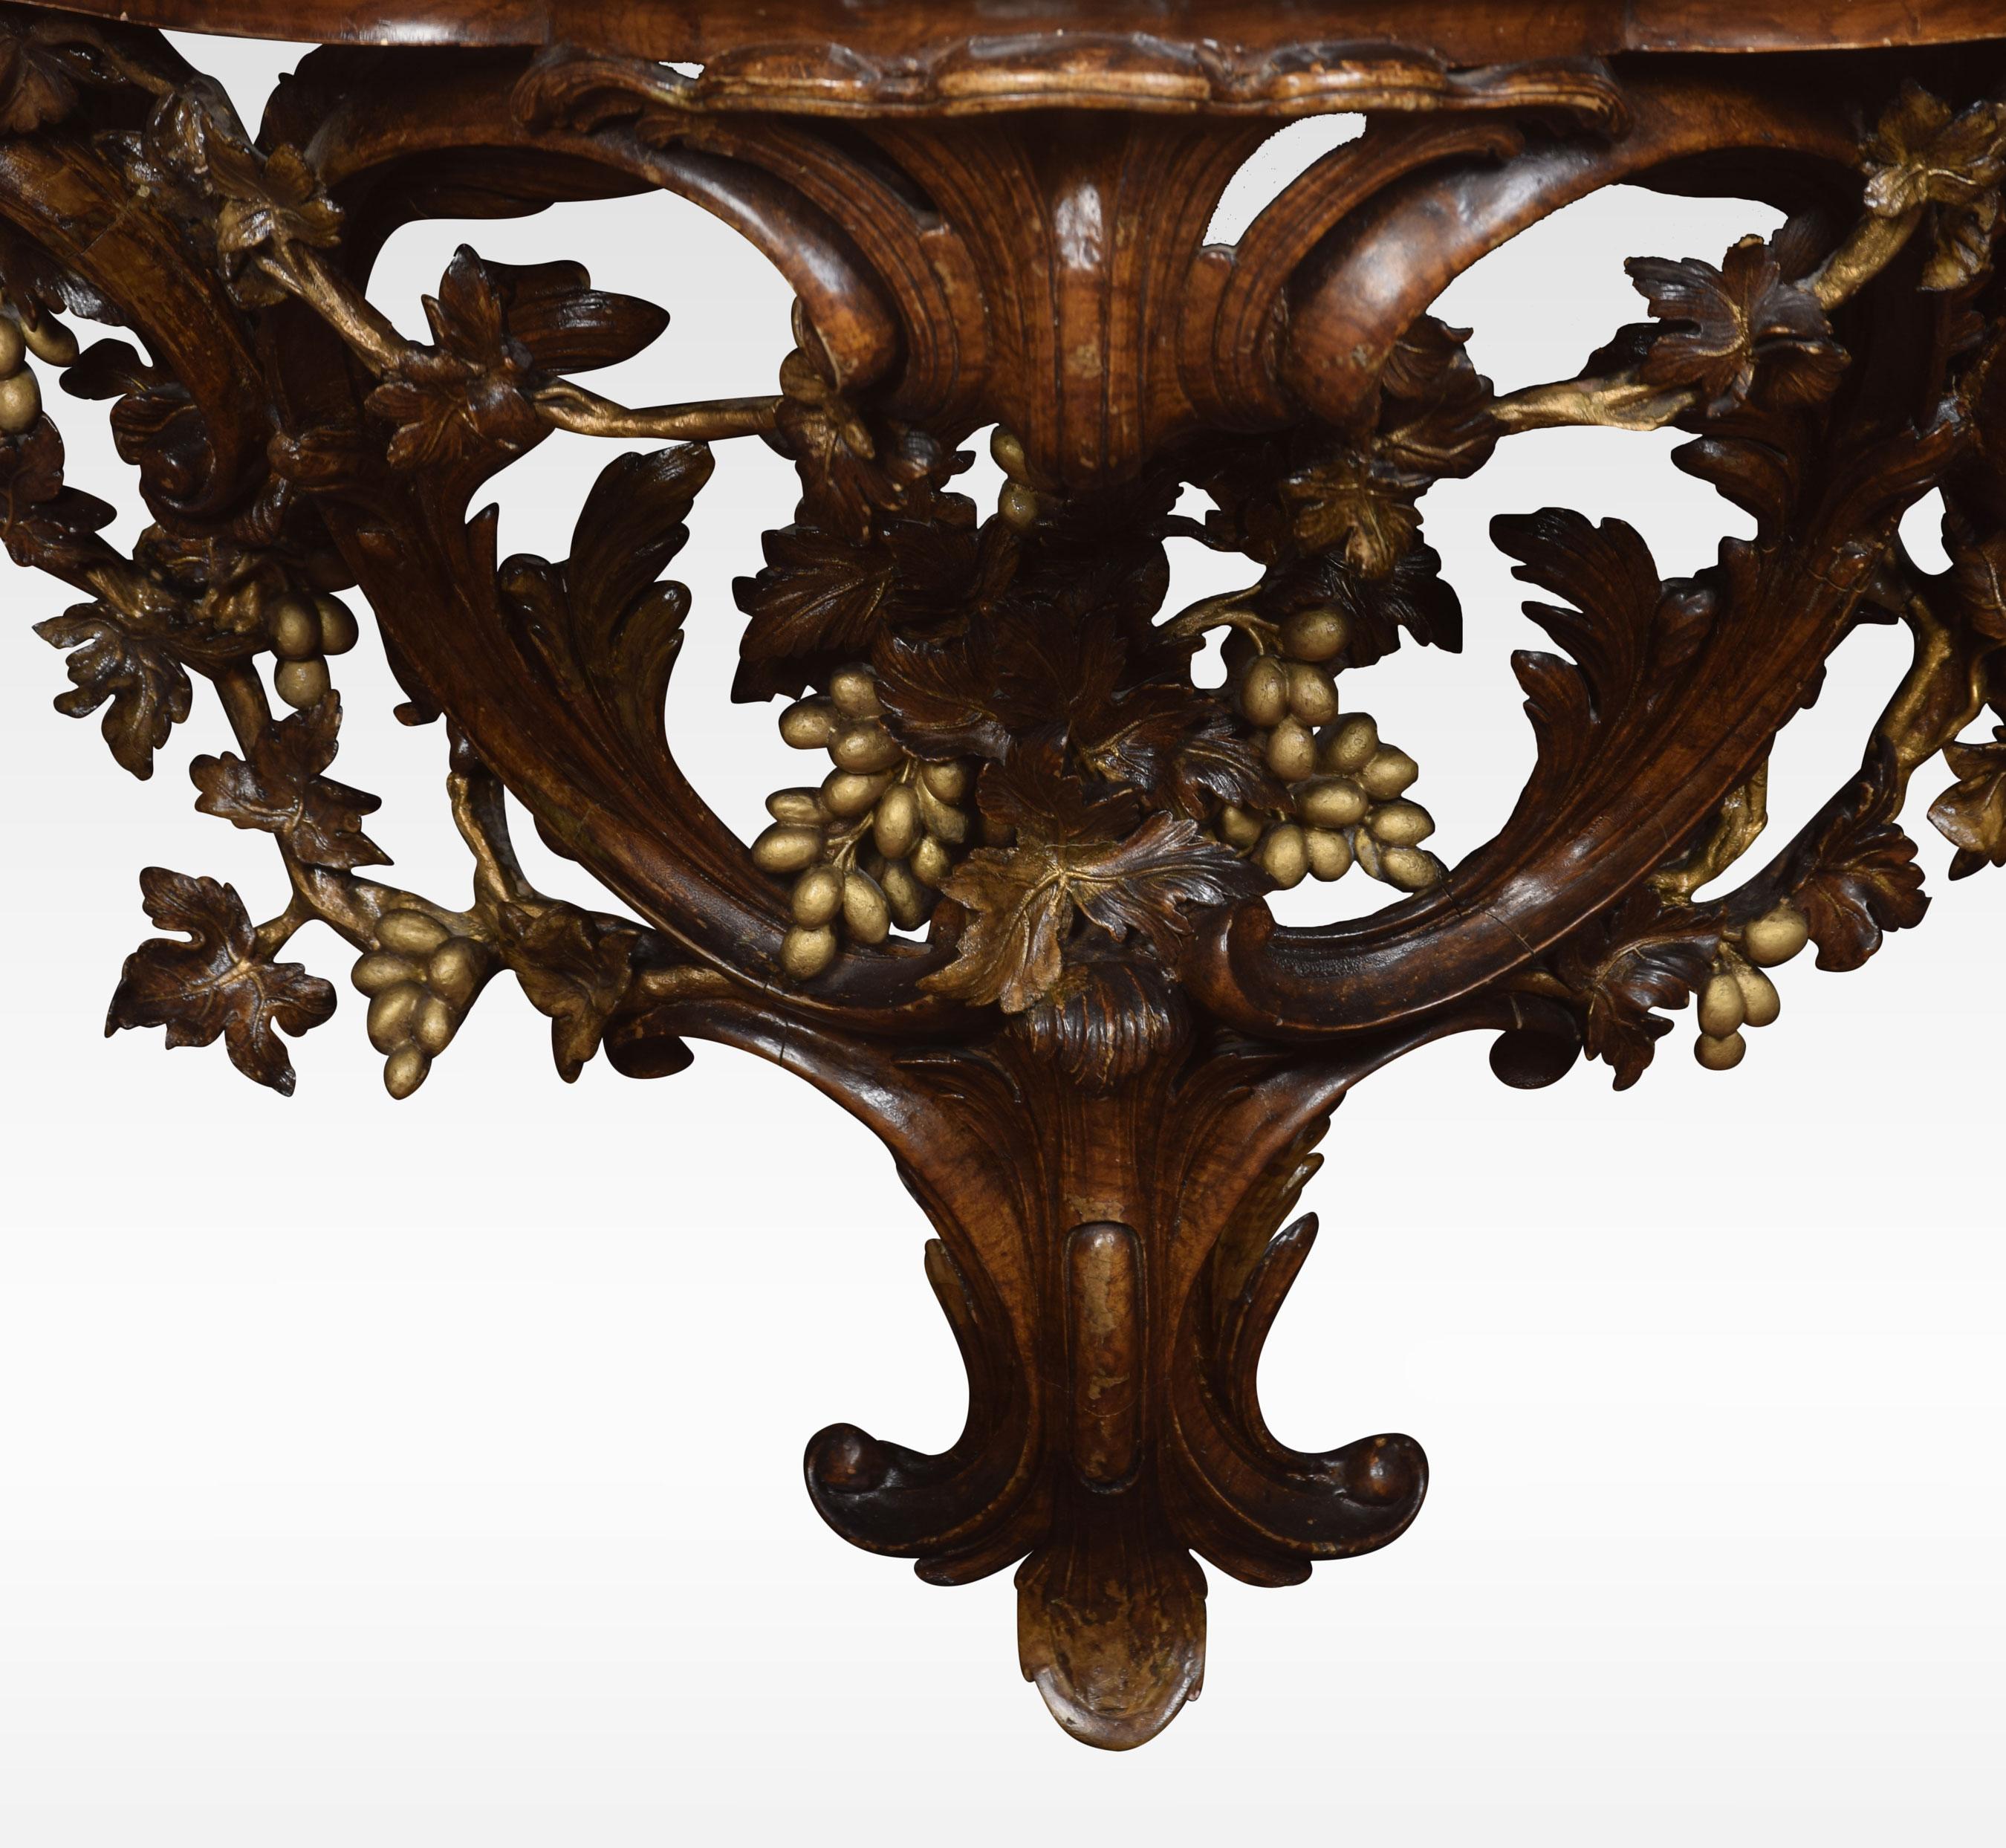 Very large pair of wall brackets, the well figured walnut tops over an open sinuous bracket with grape and leaf carving.
Dimensions:
Height 20.5 inches
Width 36.5 inches
Depth 18.5 inches.